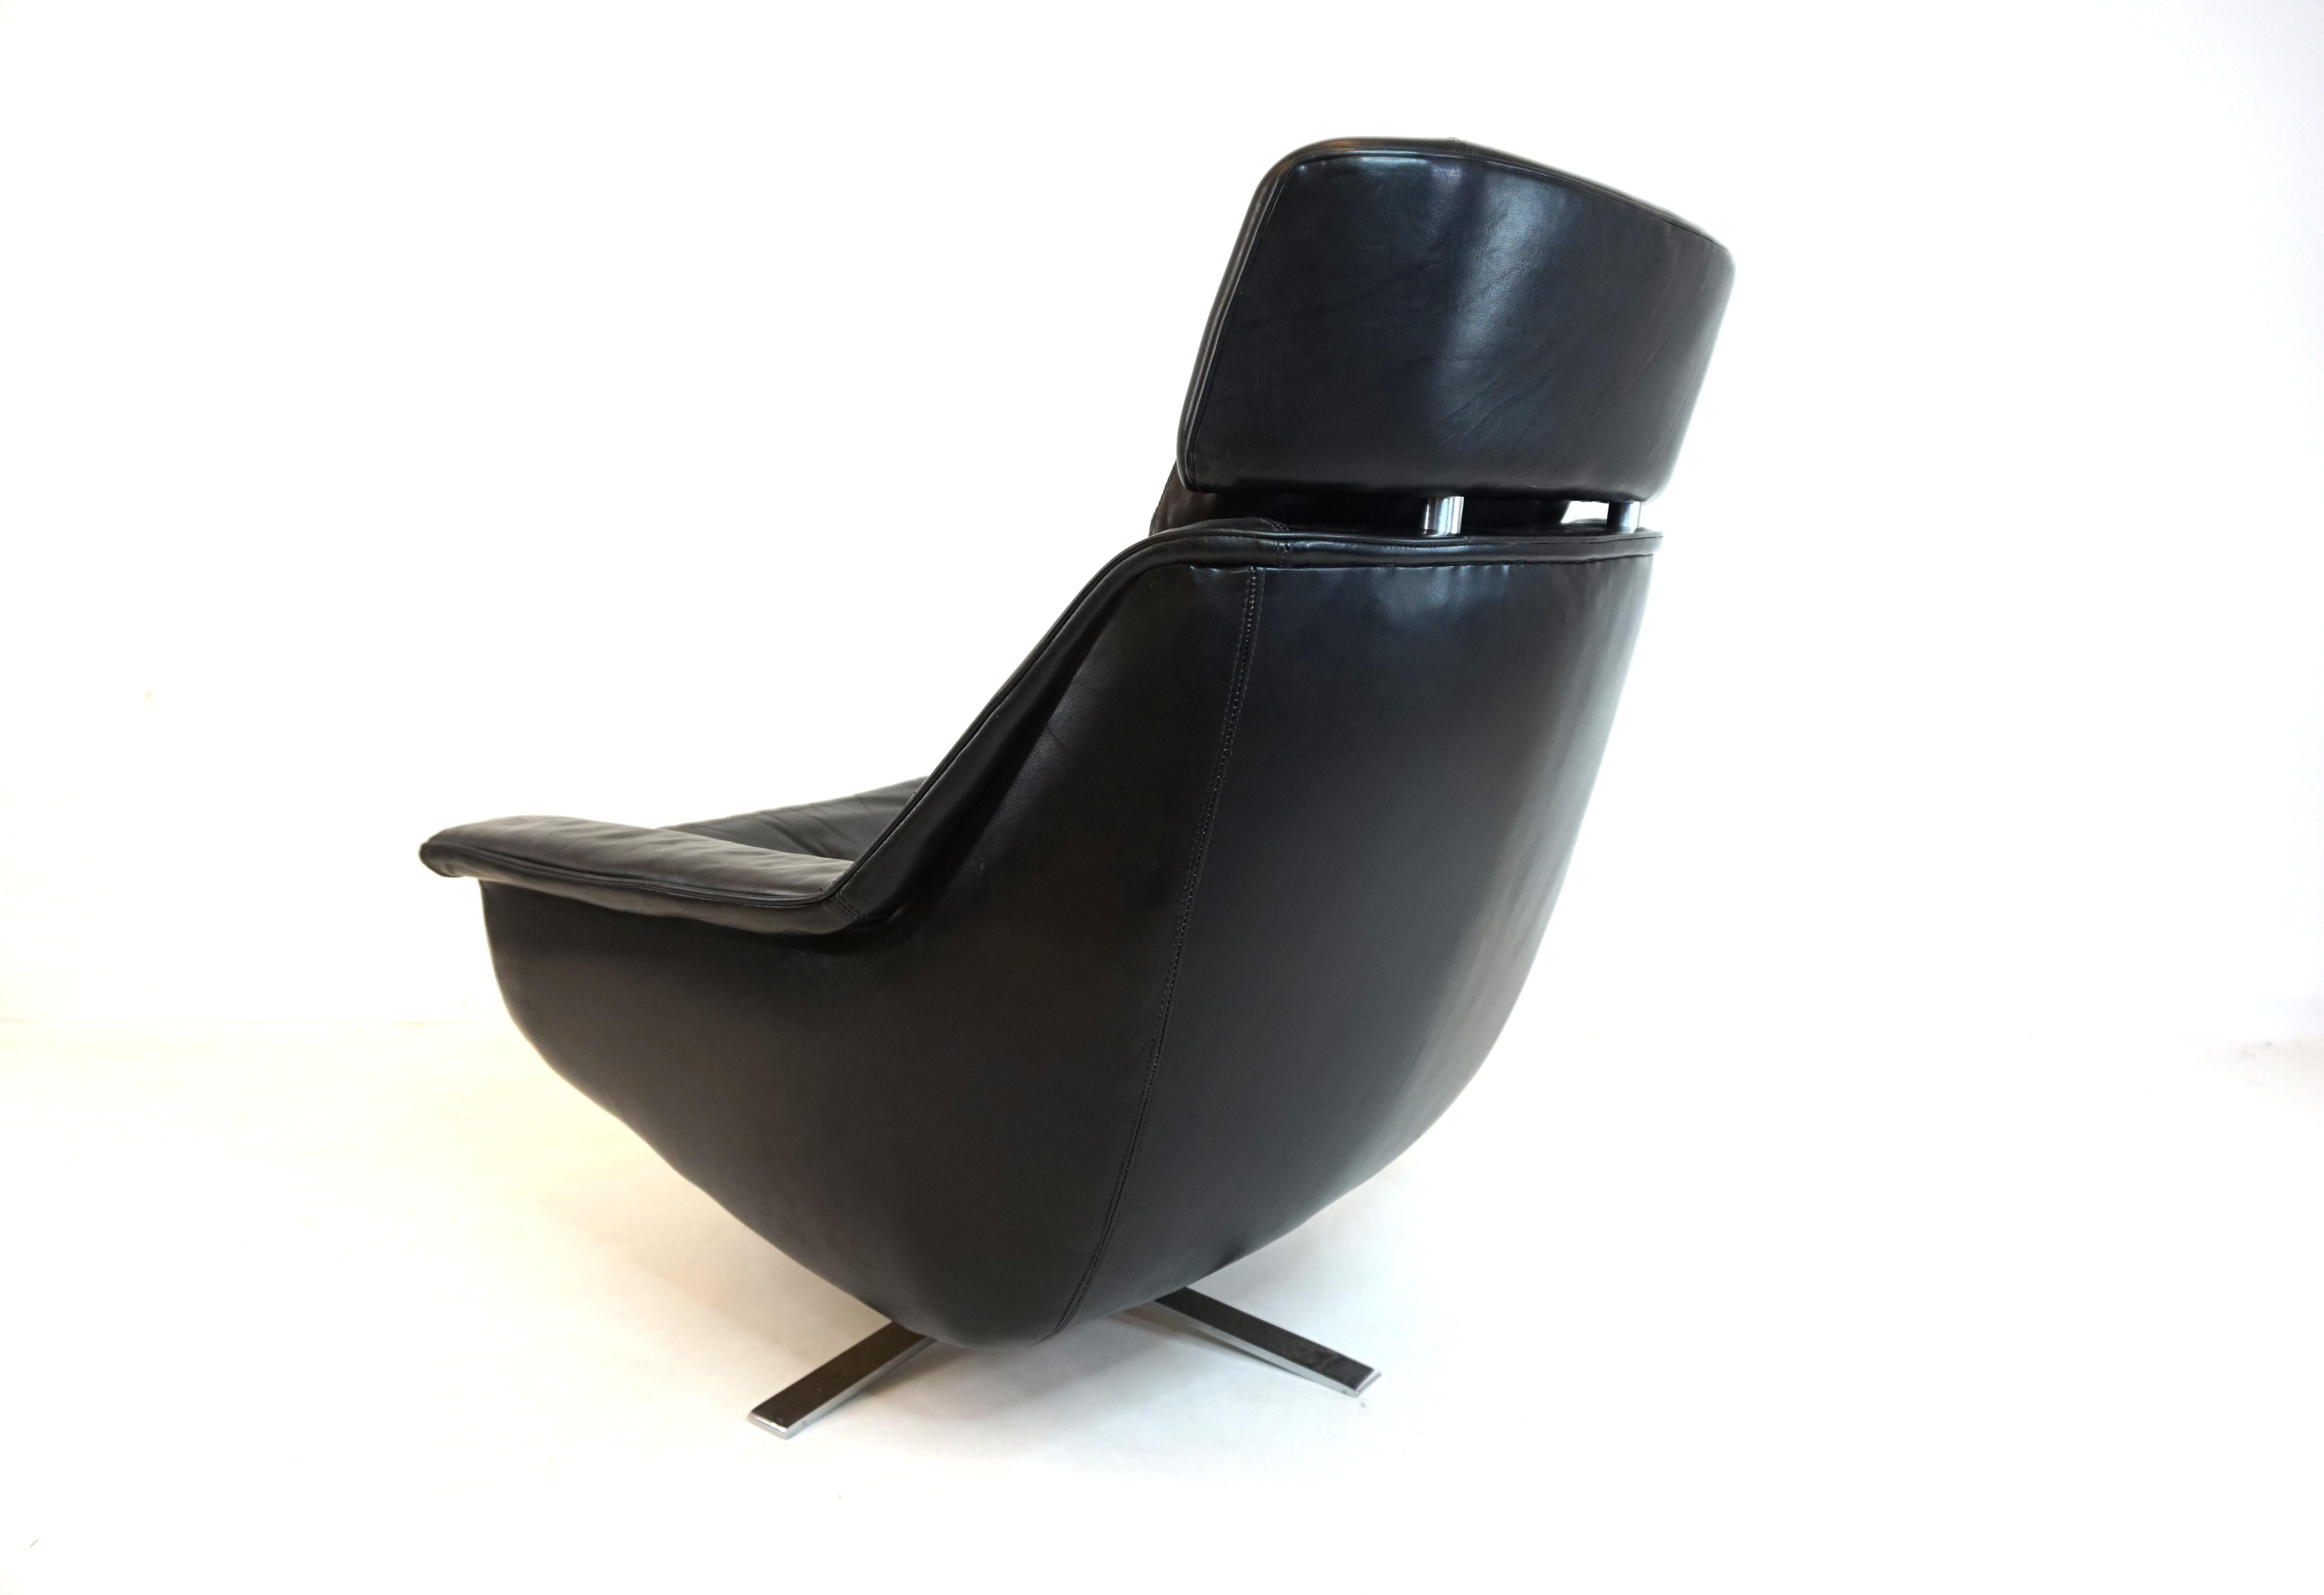 This black leather armchair 802 from ESA, in the version with a high backrest, is in very good condition. The black leather of the cushions is soft, shows minimal signs of wear and makes a very high-quality impression. Only the armrests show a